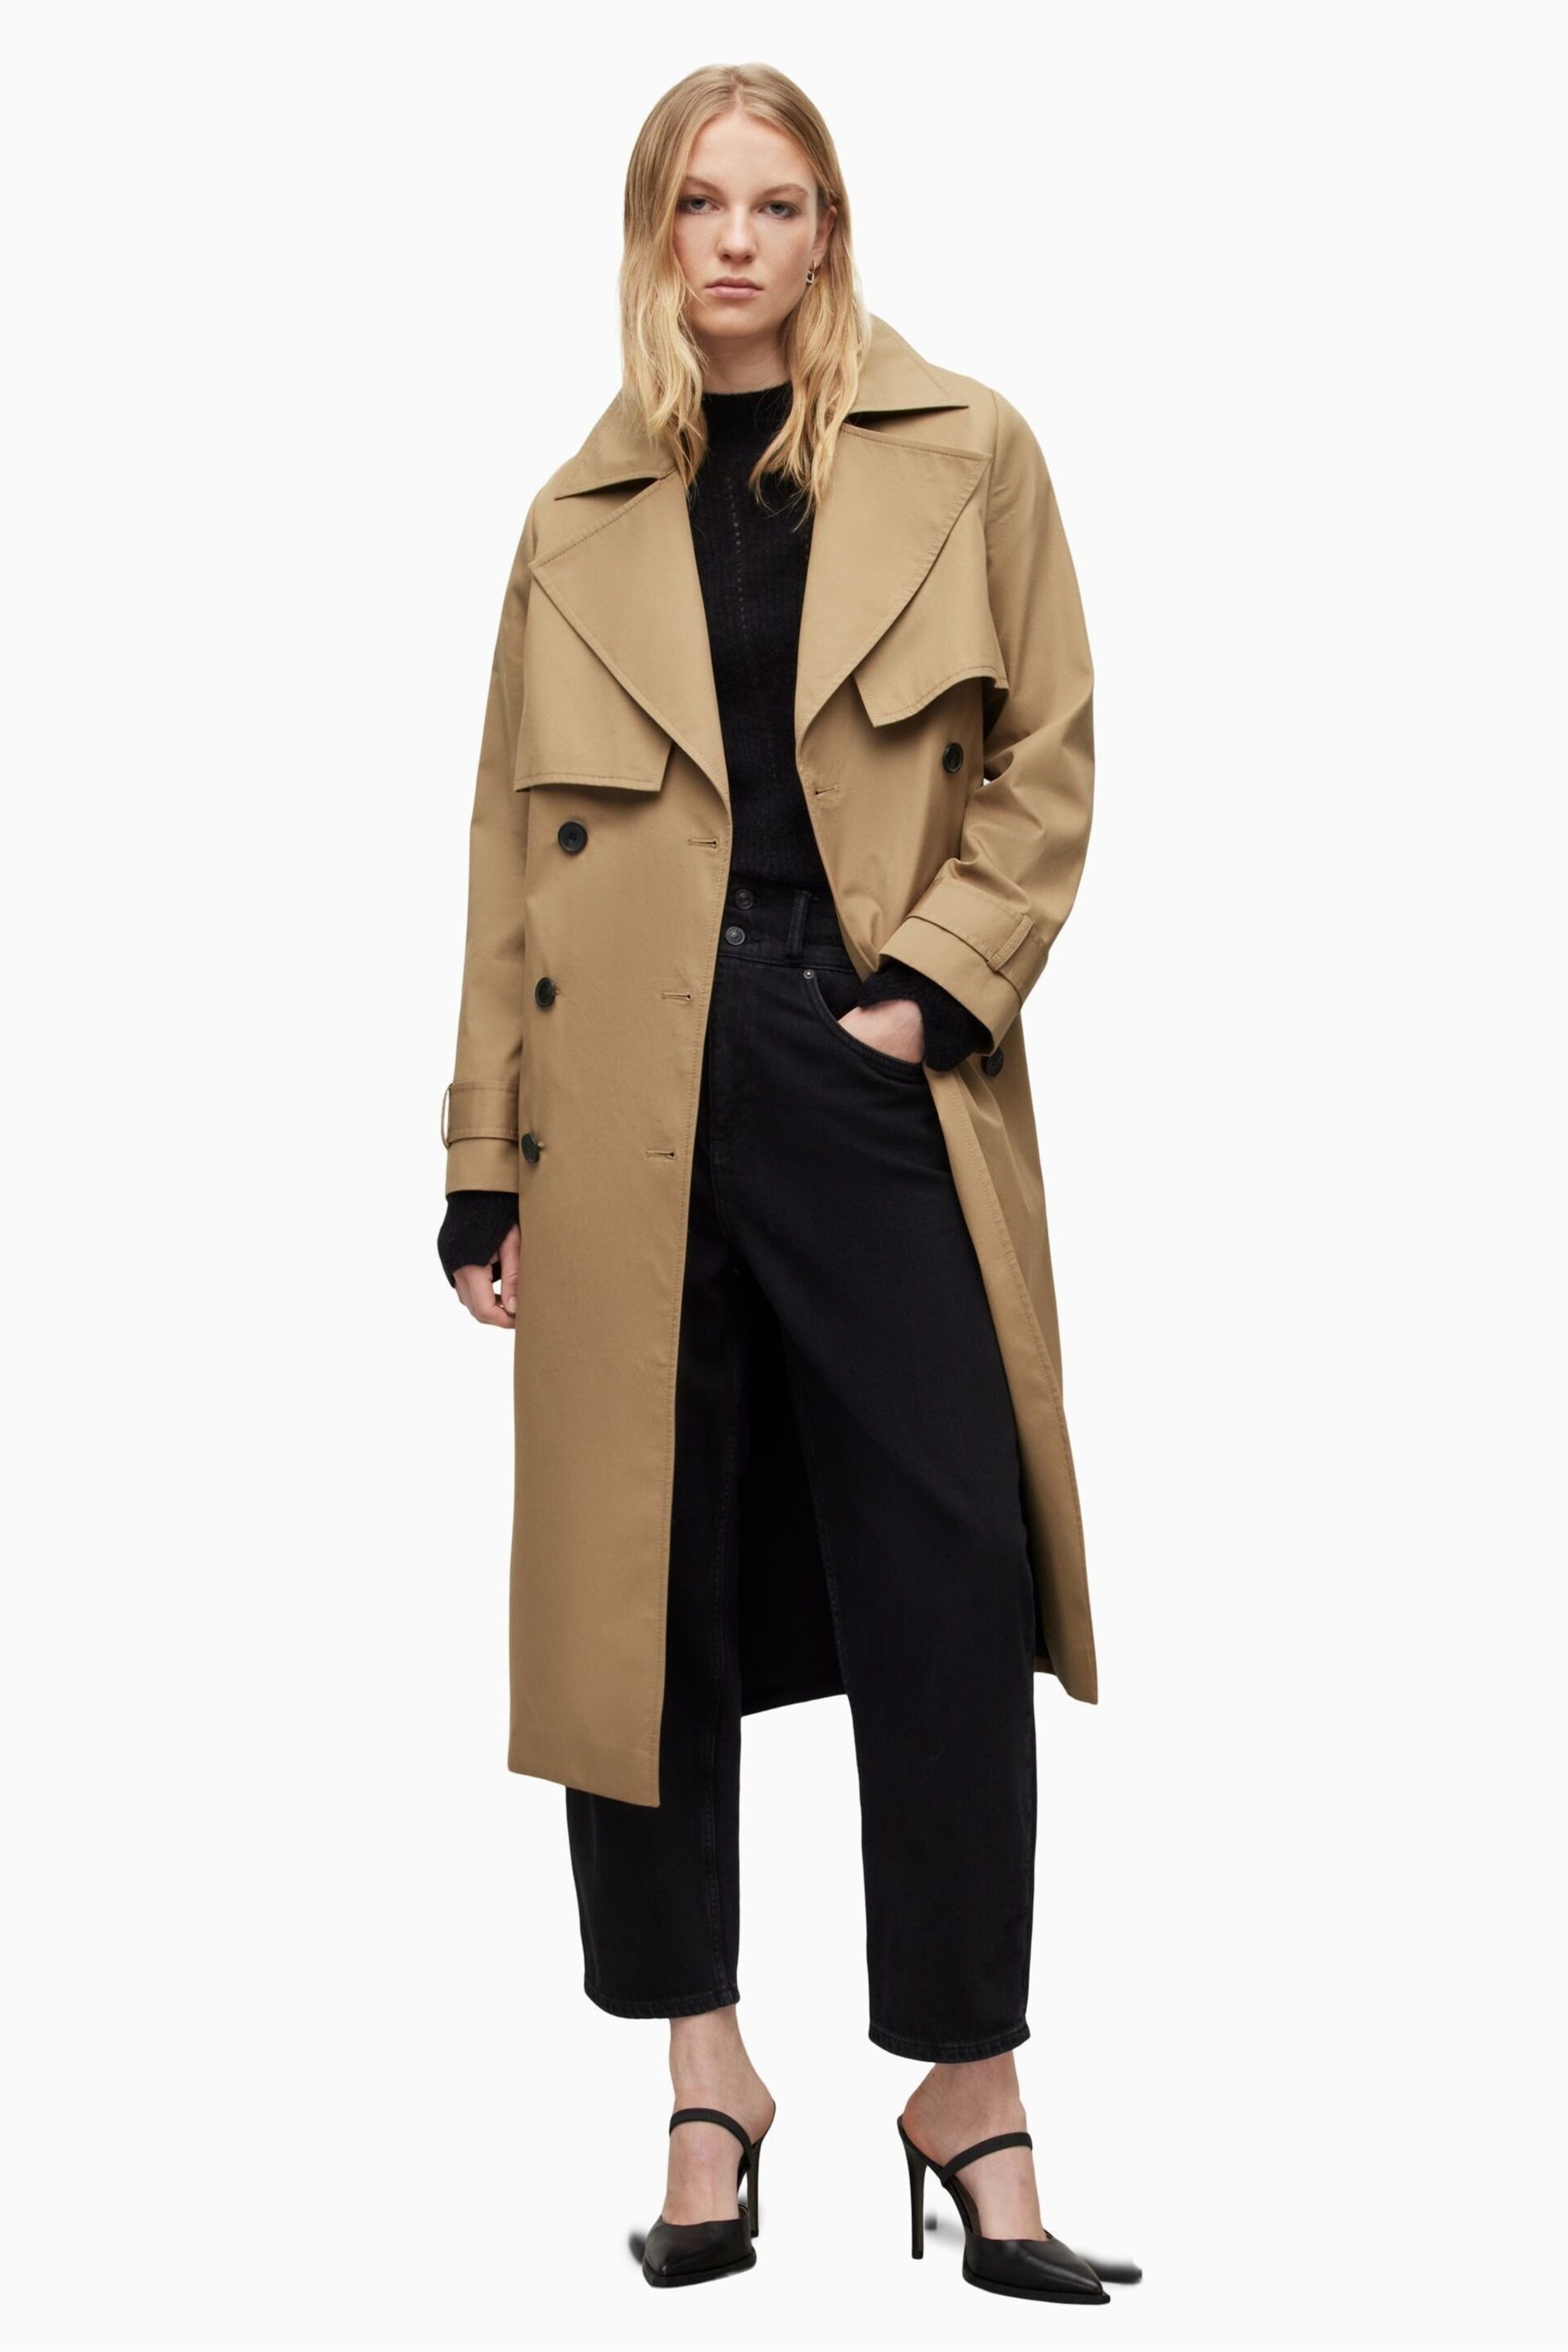 AllSaints Black Mixie Trench Coat - Image 1 of 8